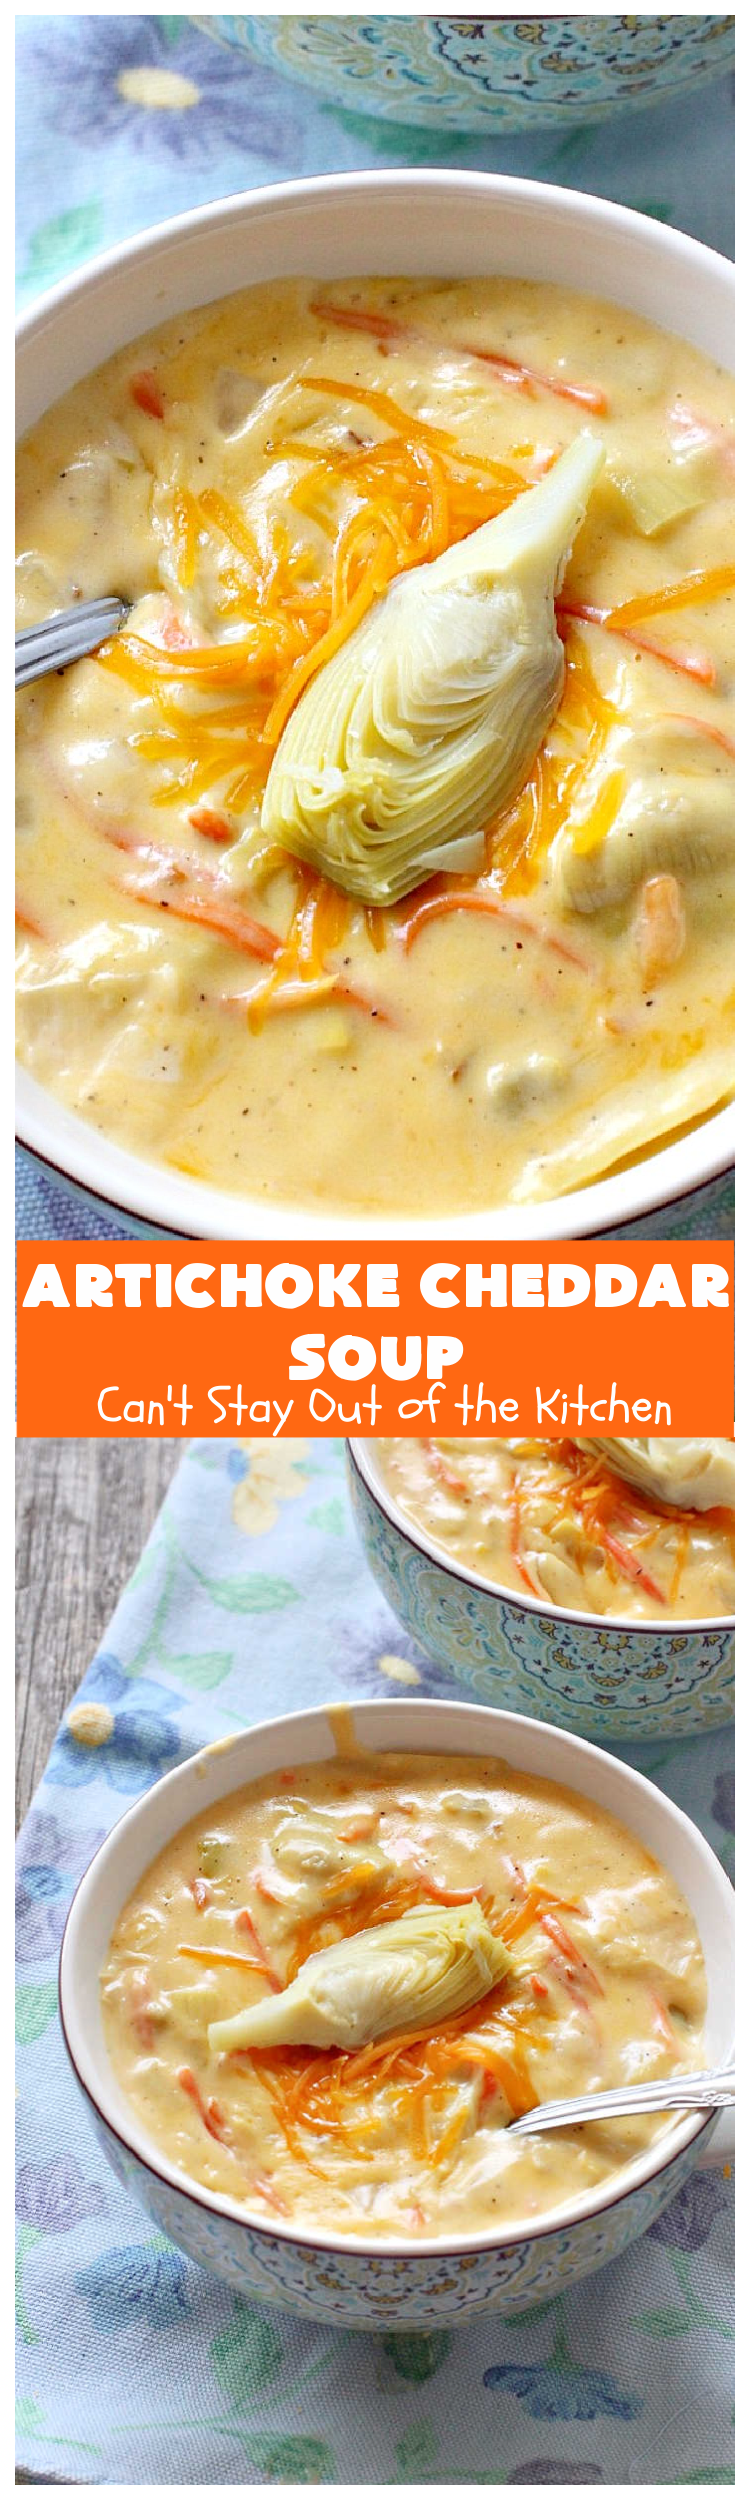 Artichoke Cheddar Soup | Can't Stay Out of the Kitchen | this #soup is comfort food at it's best & only takes 25 minutes to make! It's perfect for week nights now that the weather is turning cooler. #artichokes #cheddarcheese #GlutenFree #ArtichokeCheddarSoup